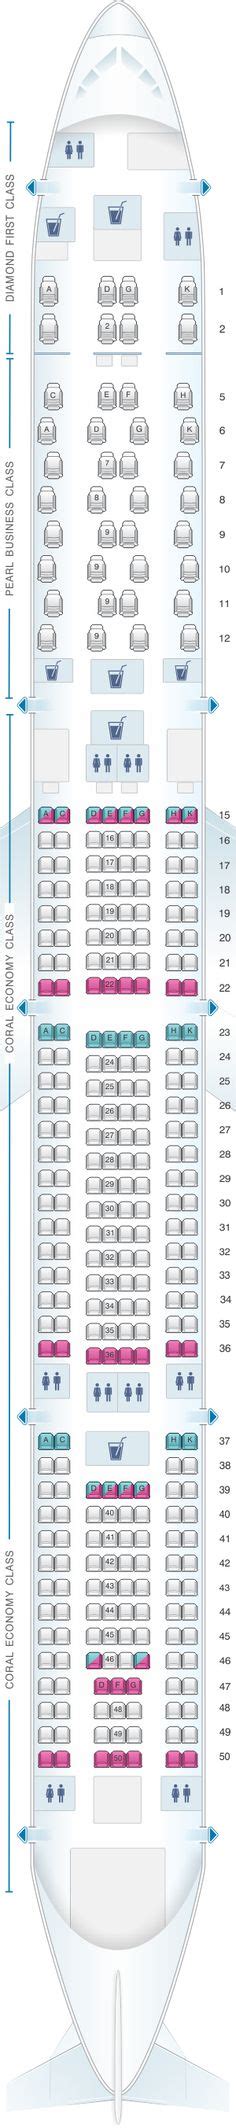 Detailed Seat Map Latam Airlines Brasil Airbus A350 Find The Best